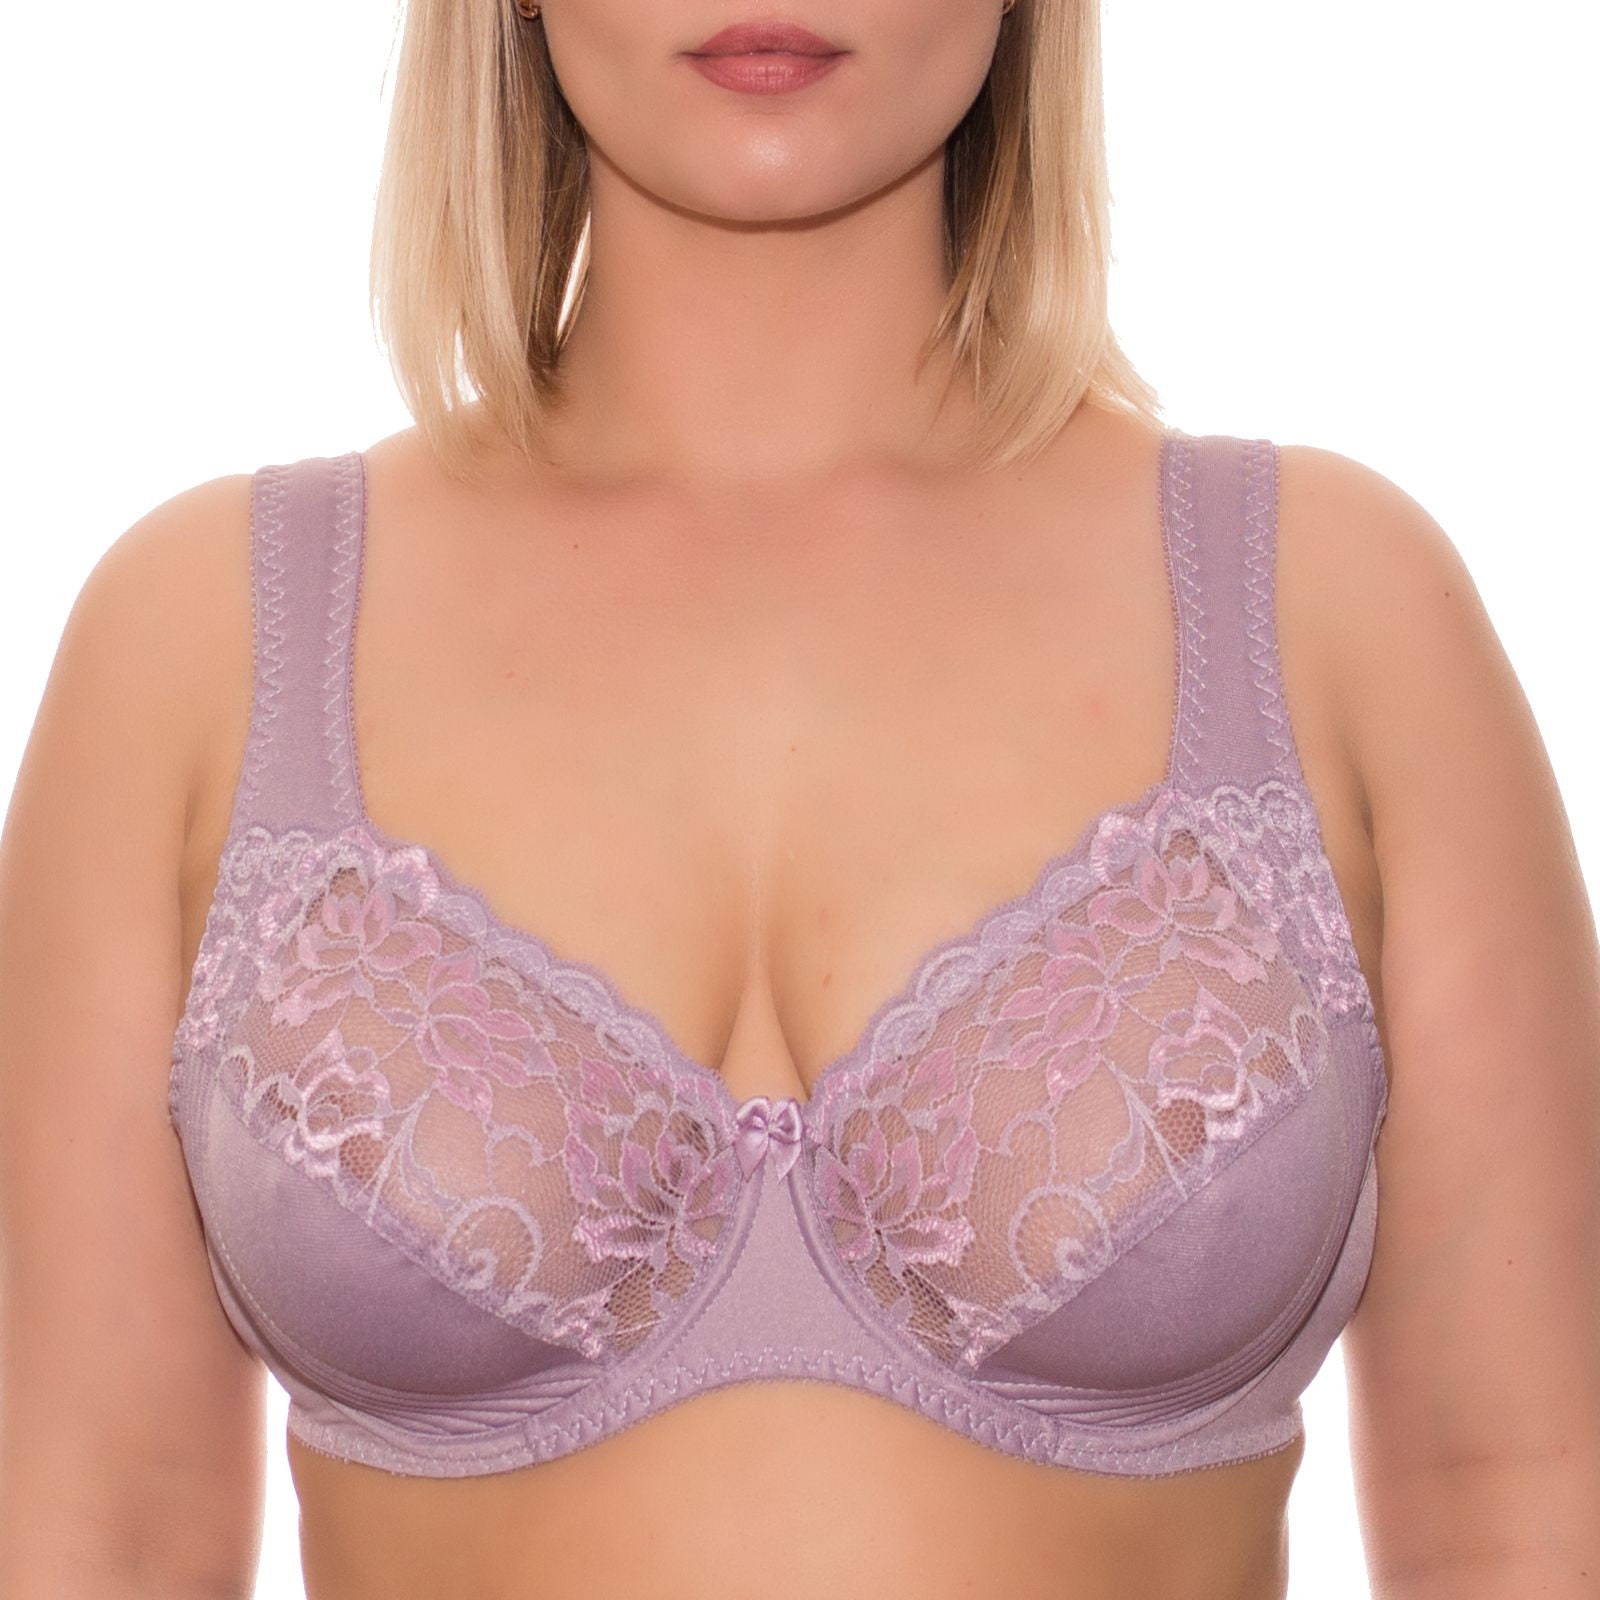 34 D Bra Size Bras For Women Full Coverage Plus Size Crotchless